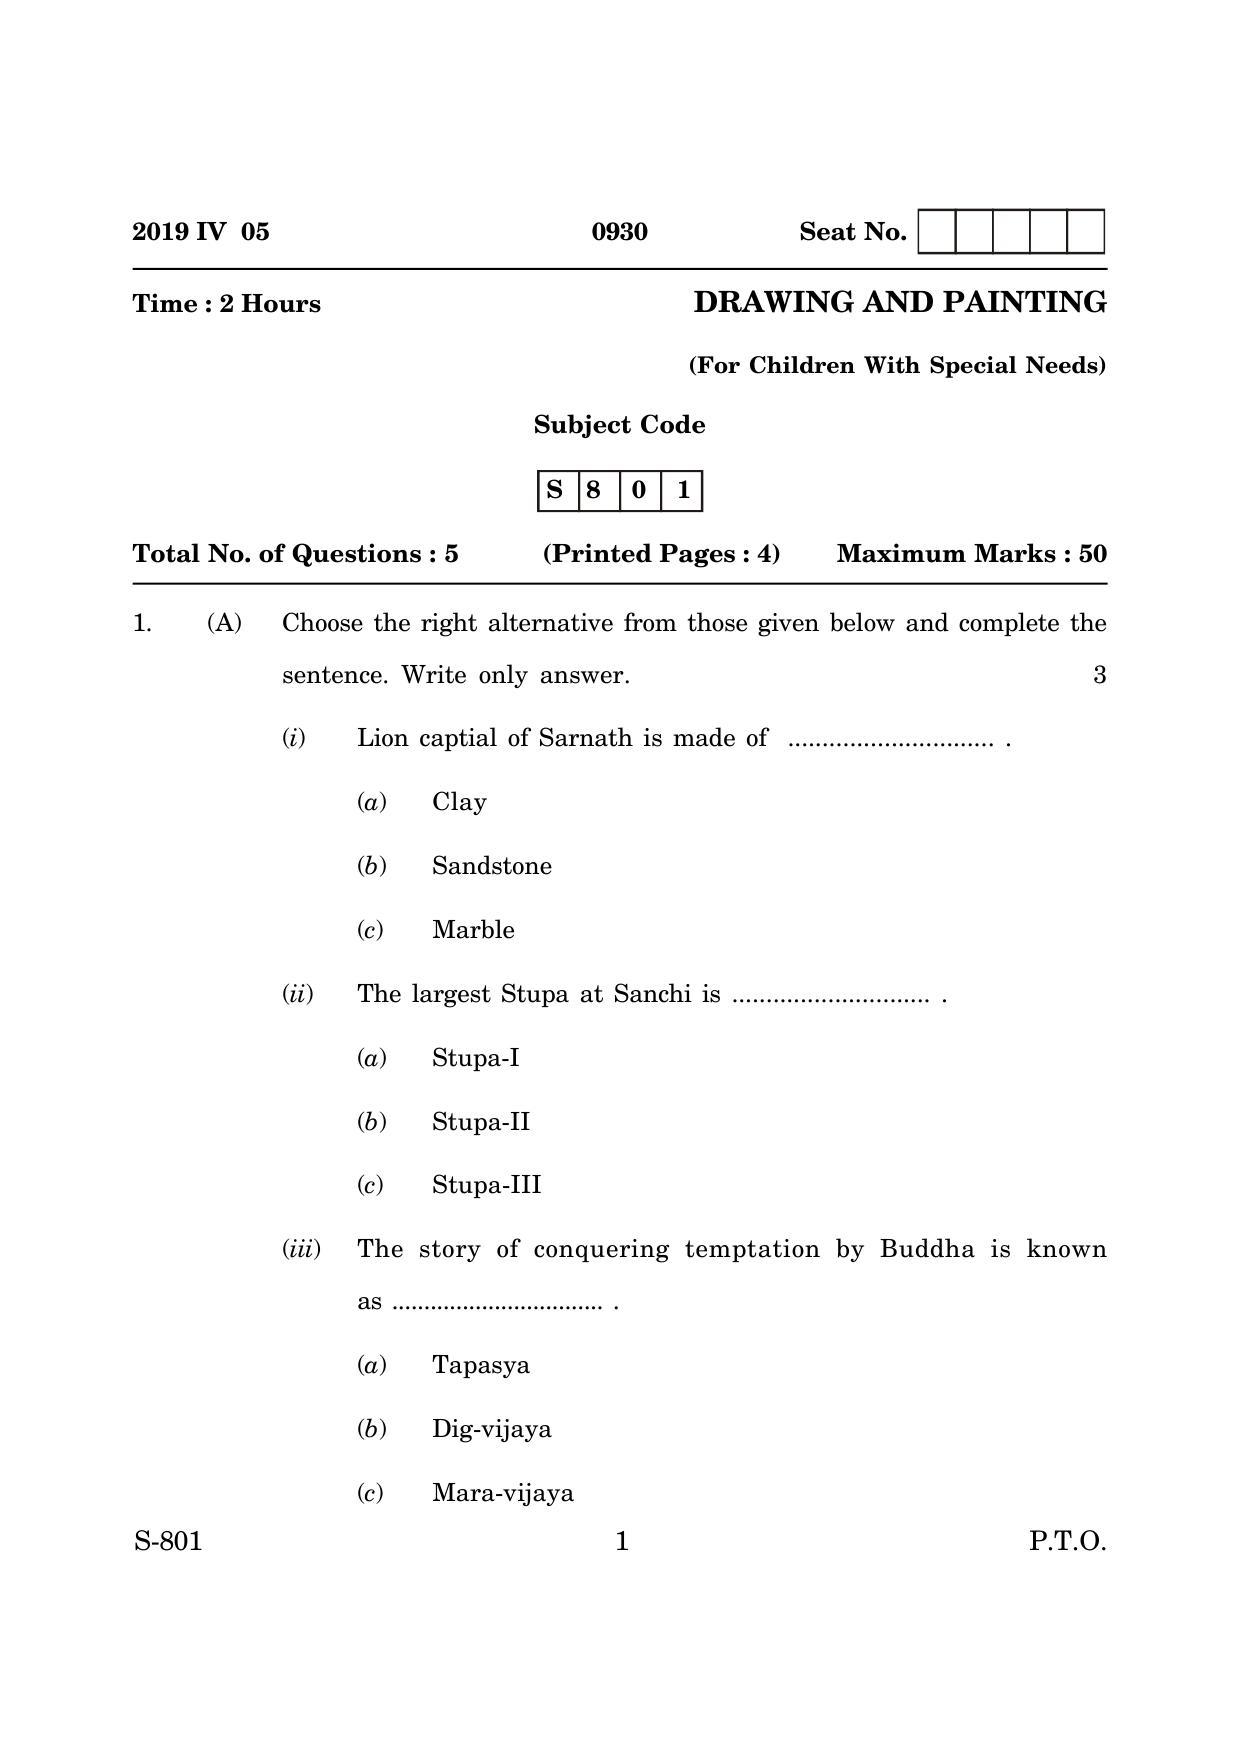 Goa Board Class 10 Drawing And Painting Cwsn  (March 2019) Question Paper - Page 1